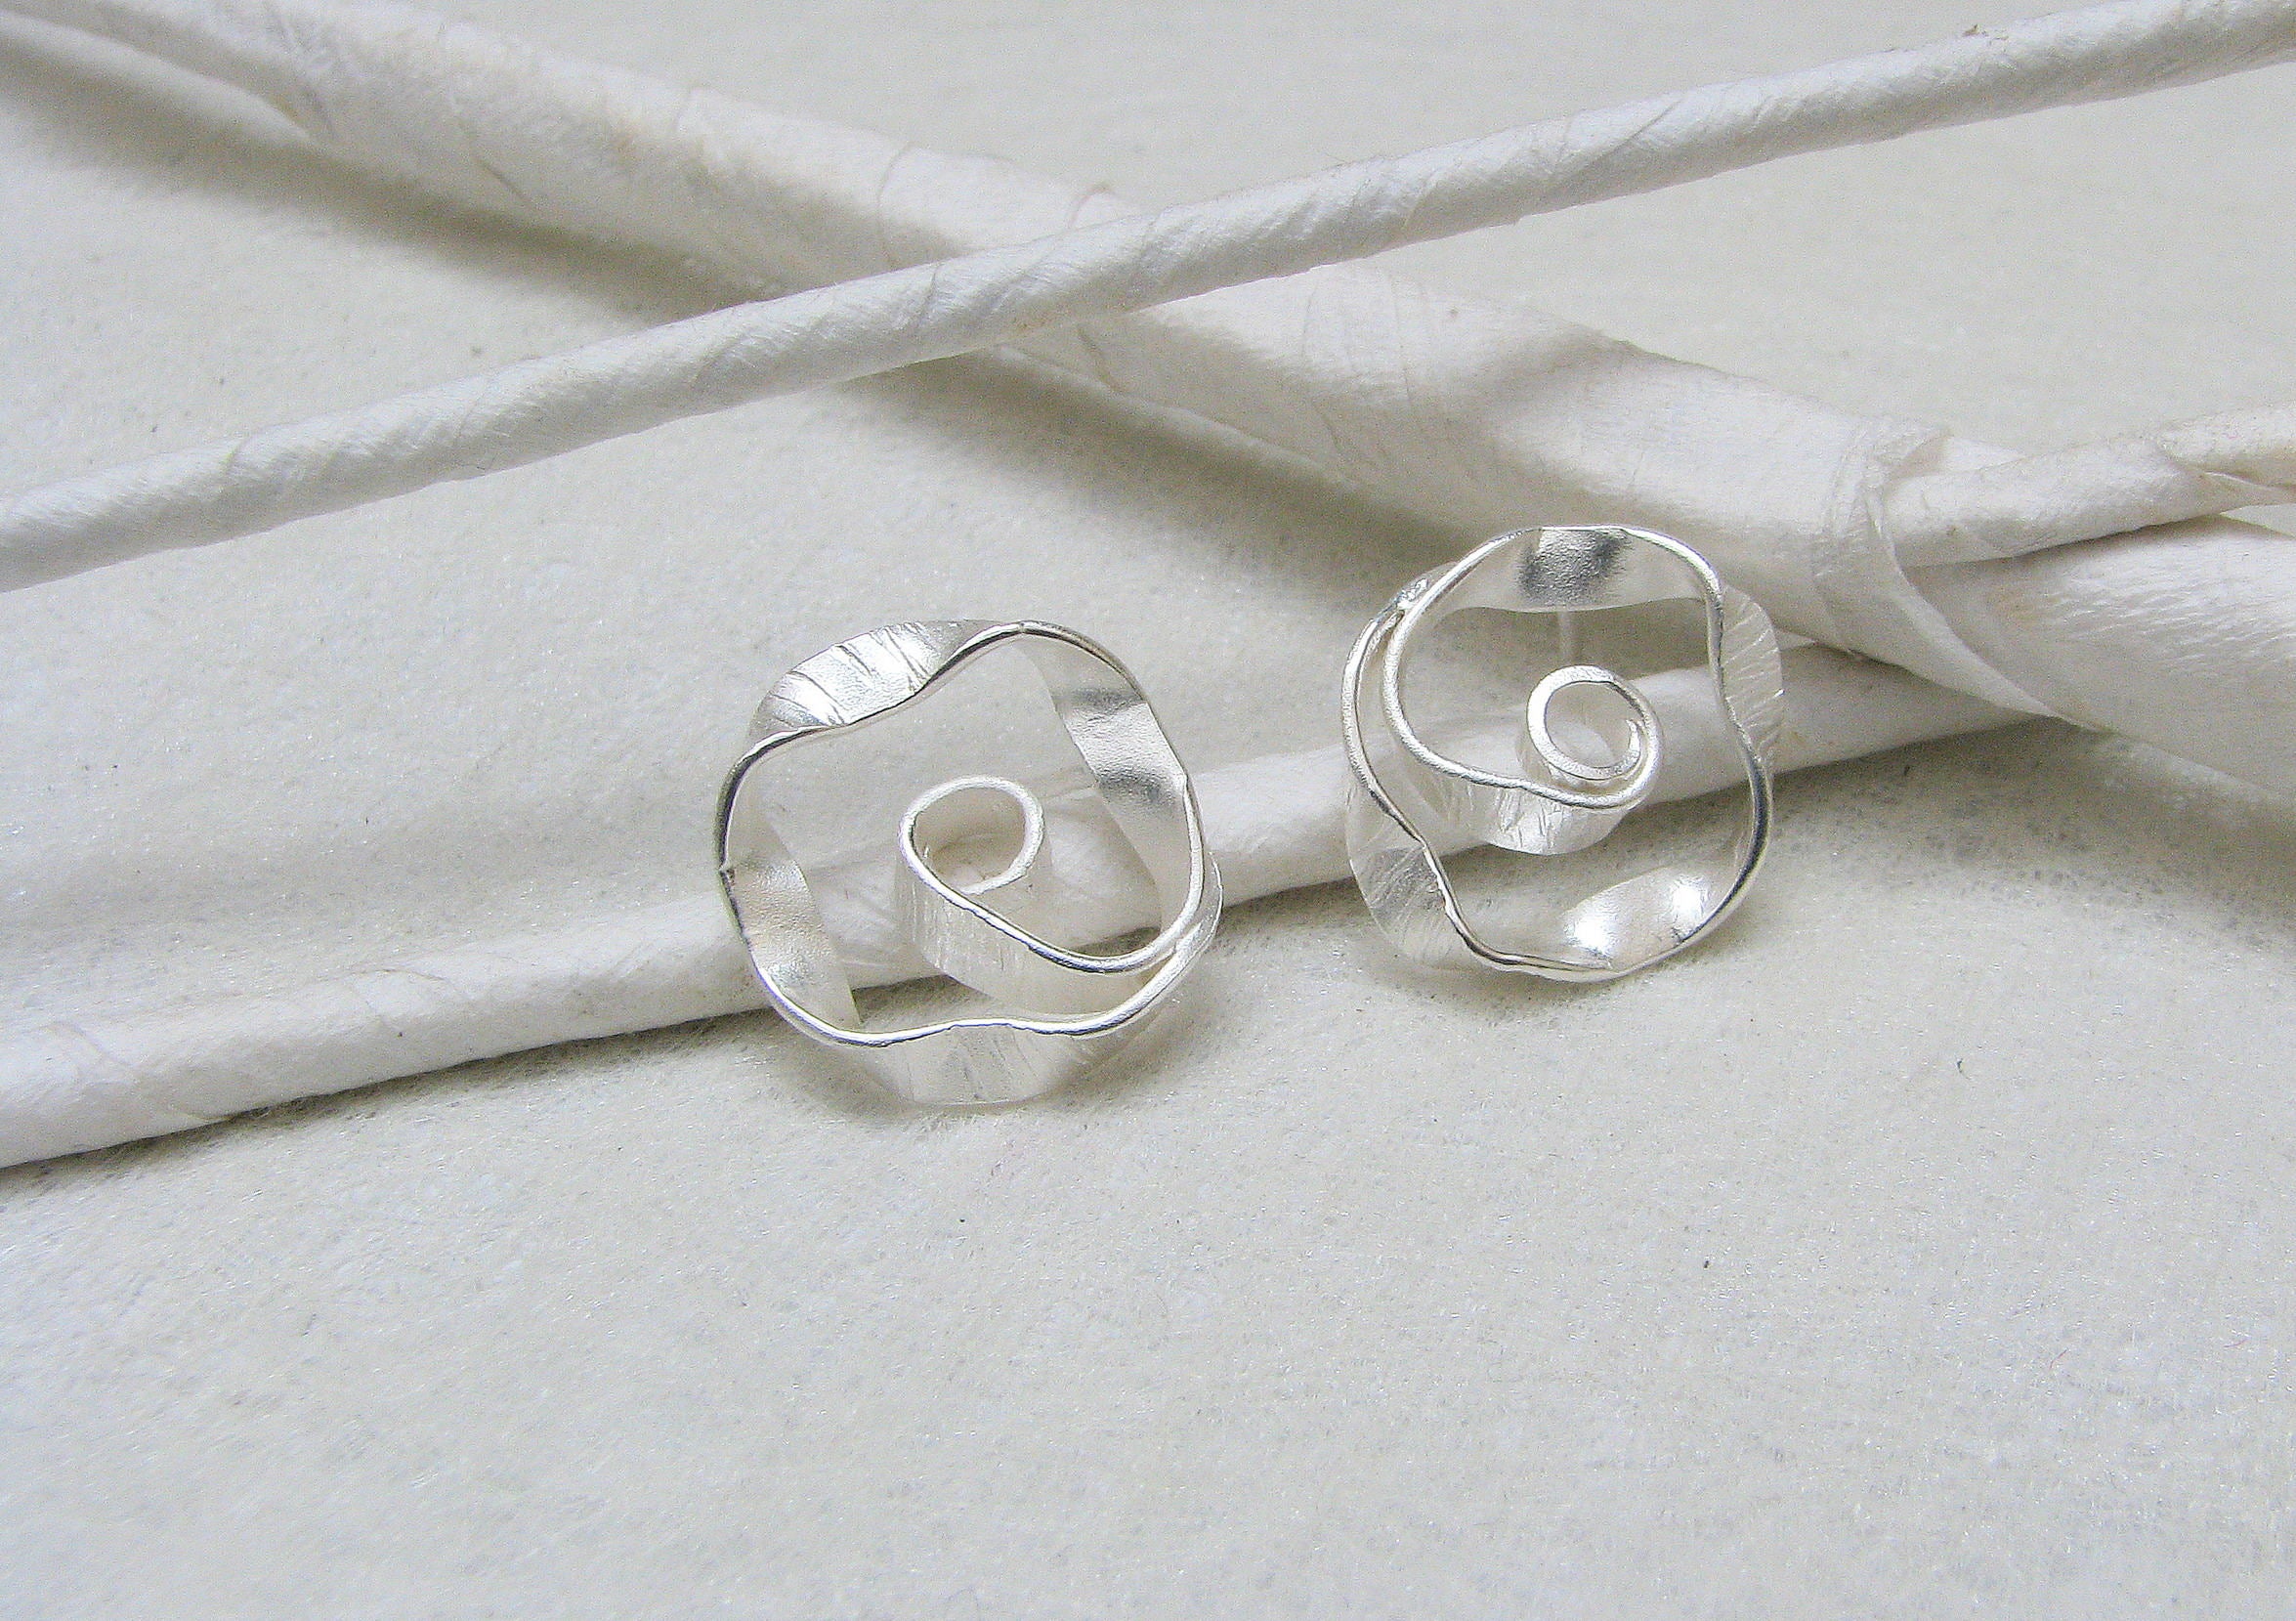 TWisT -  small earstuds in Sterling Silver or Sterling Silver 18 karat gold plating